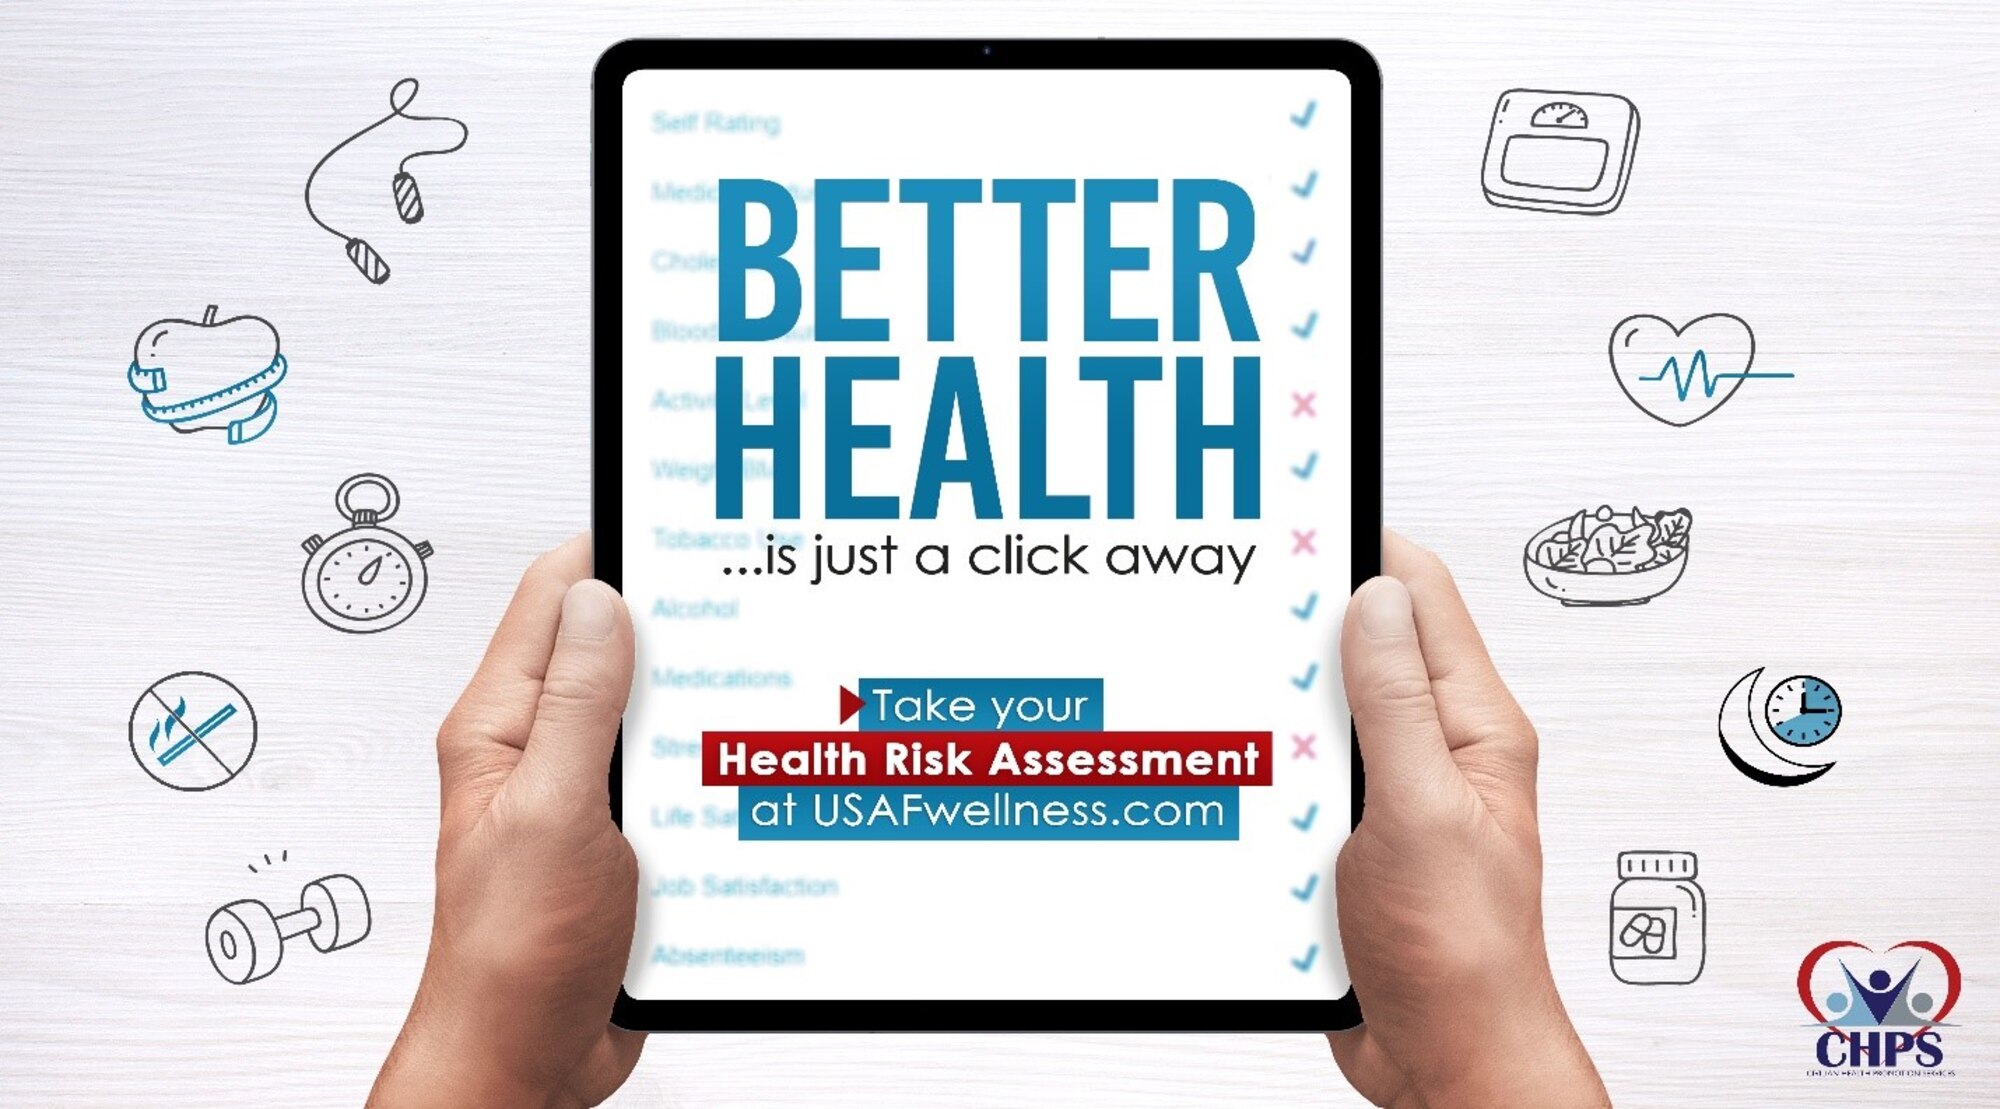 A graphic encouraging people to take their Health Risk Assessment at USAFwellness.com.